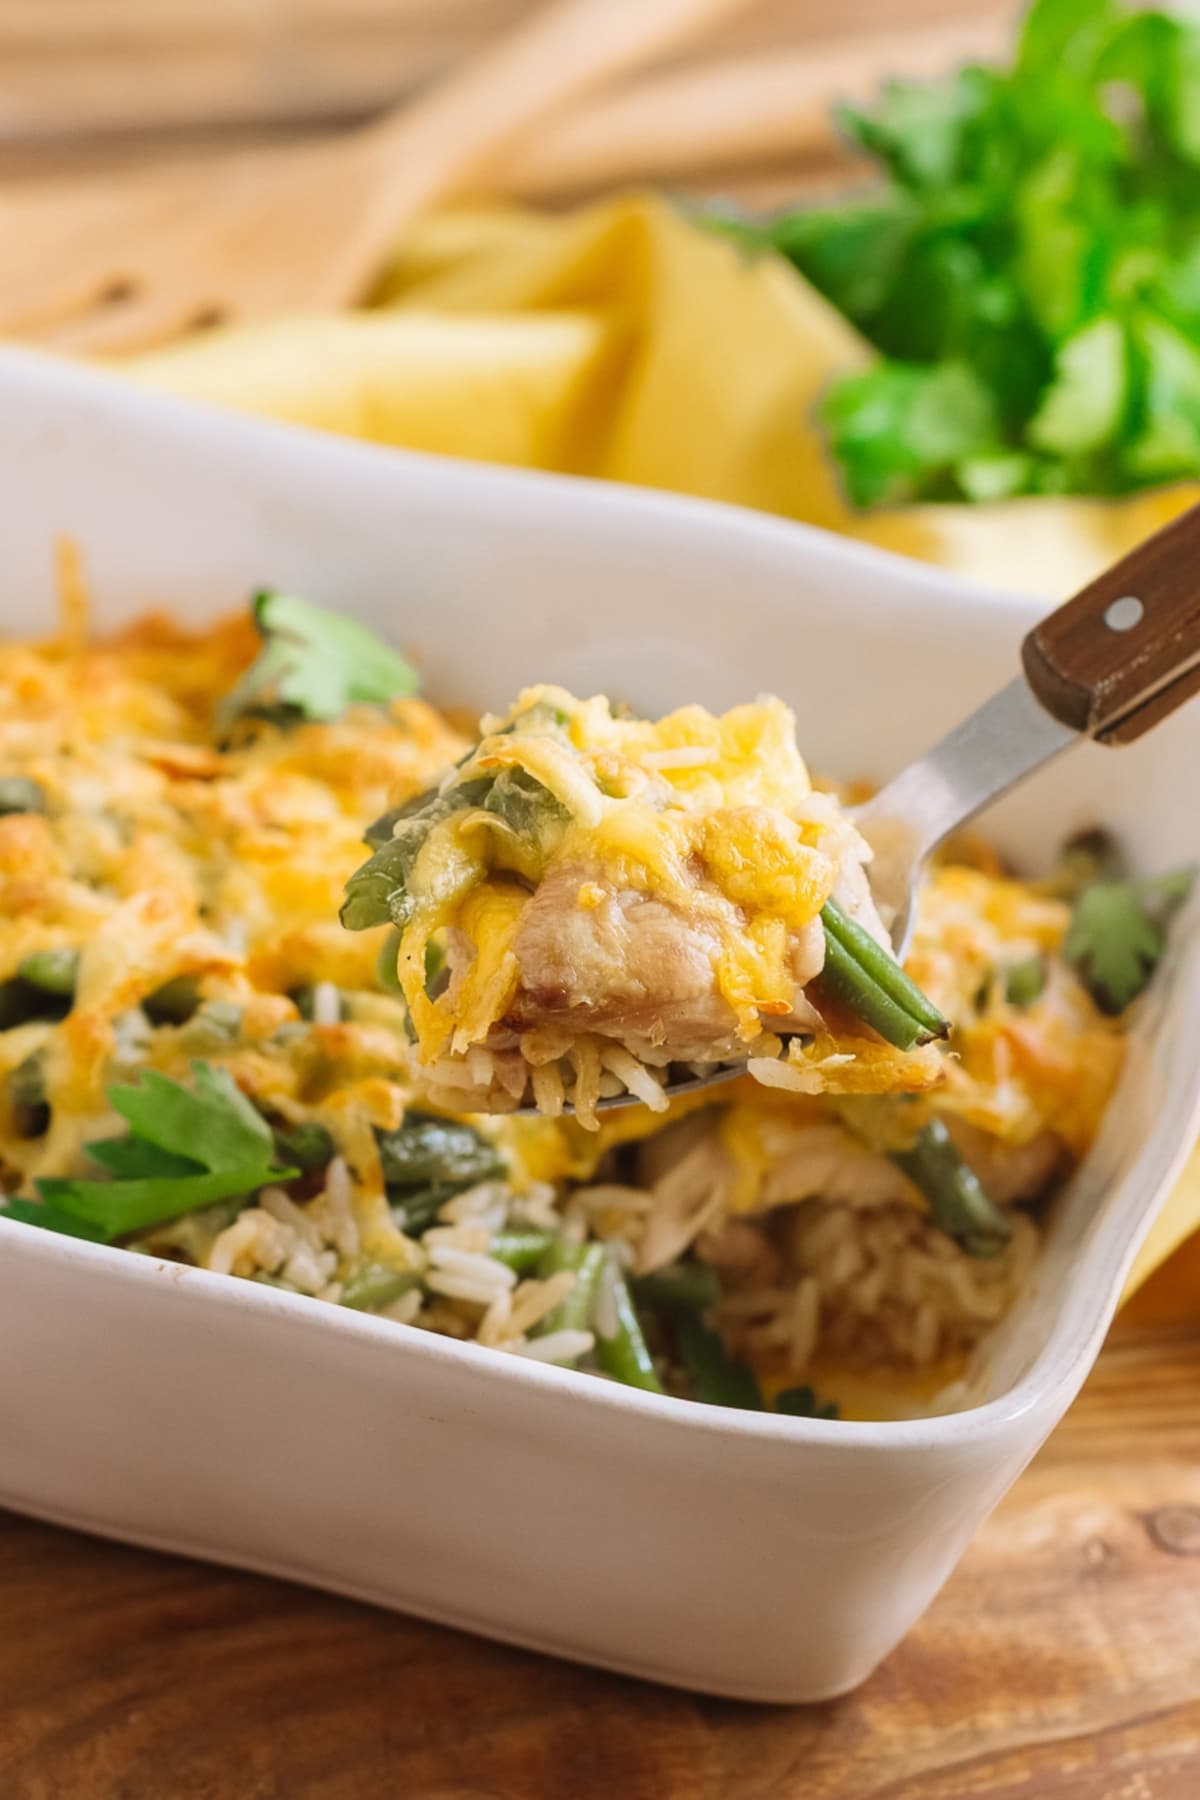 A delicious casserole dish featuring tender chicken and fluffy rice, perfectly cooked and ready to be enjoyed